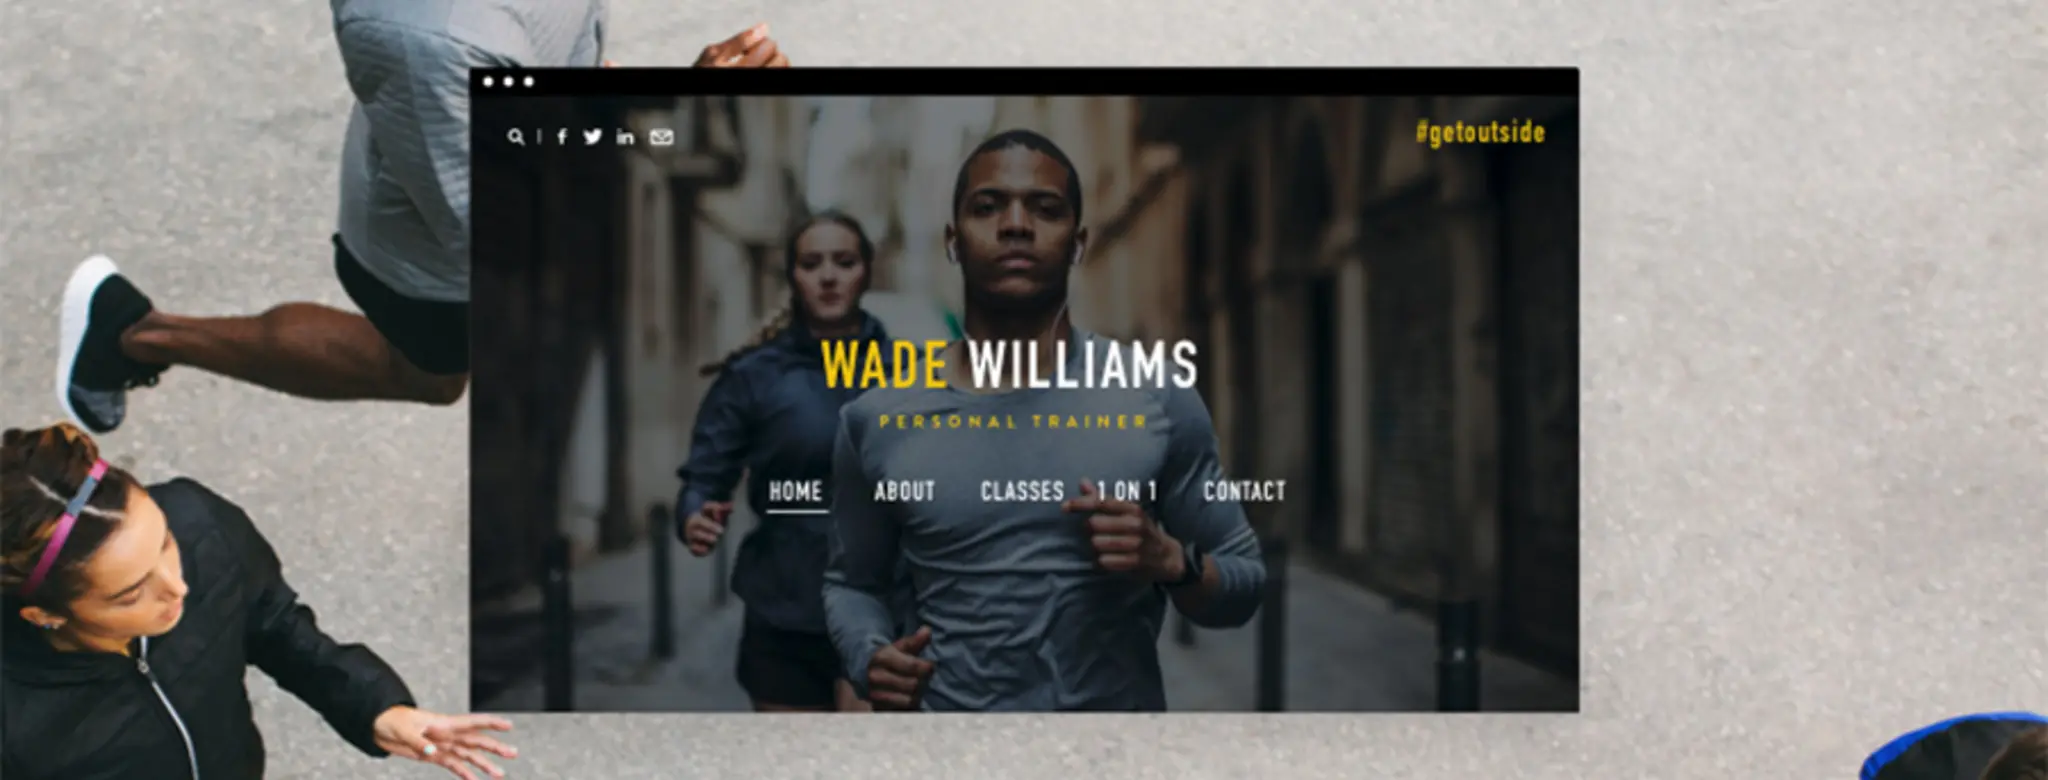 runners and website home screen